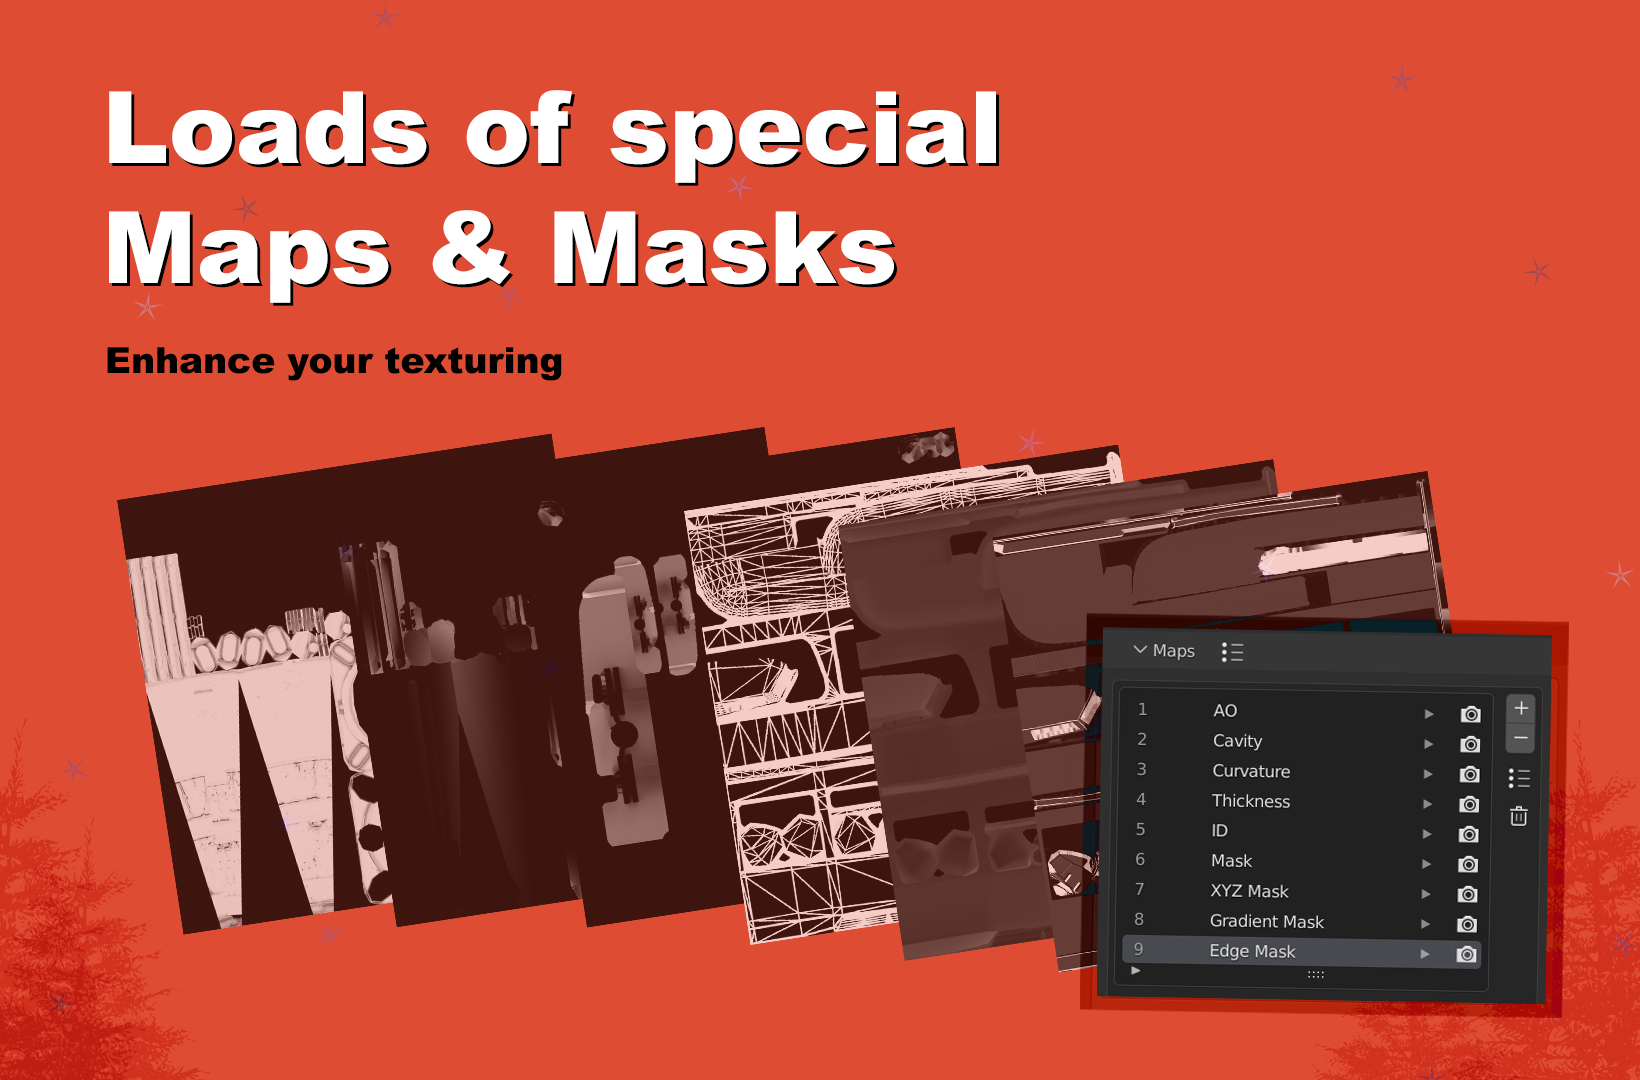 Enhance your texturing with loads of special maps and masks